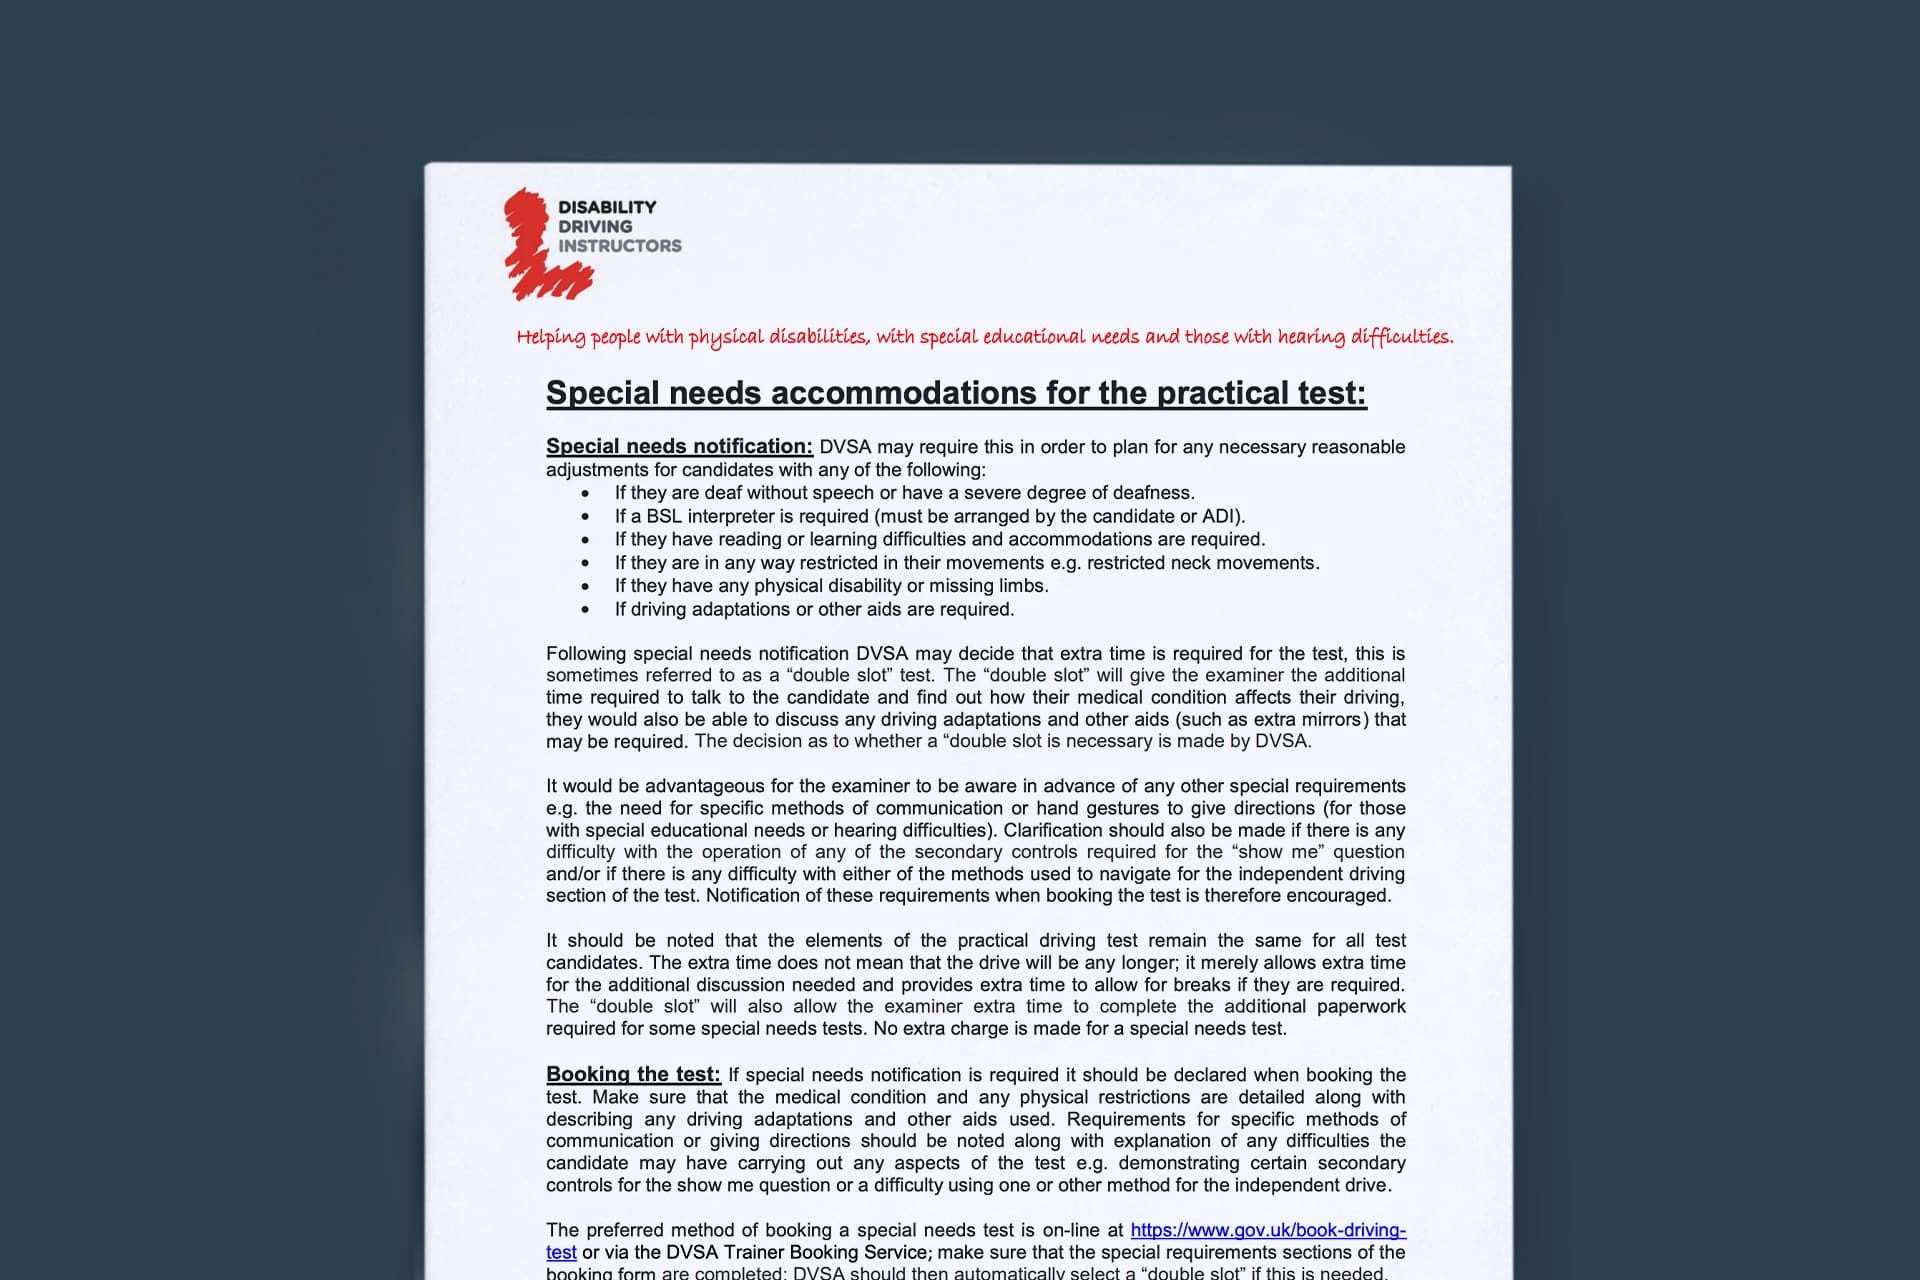 COVID-19 Special Needs Accommodations for taking the practical test